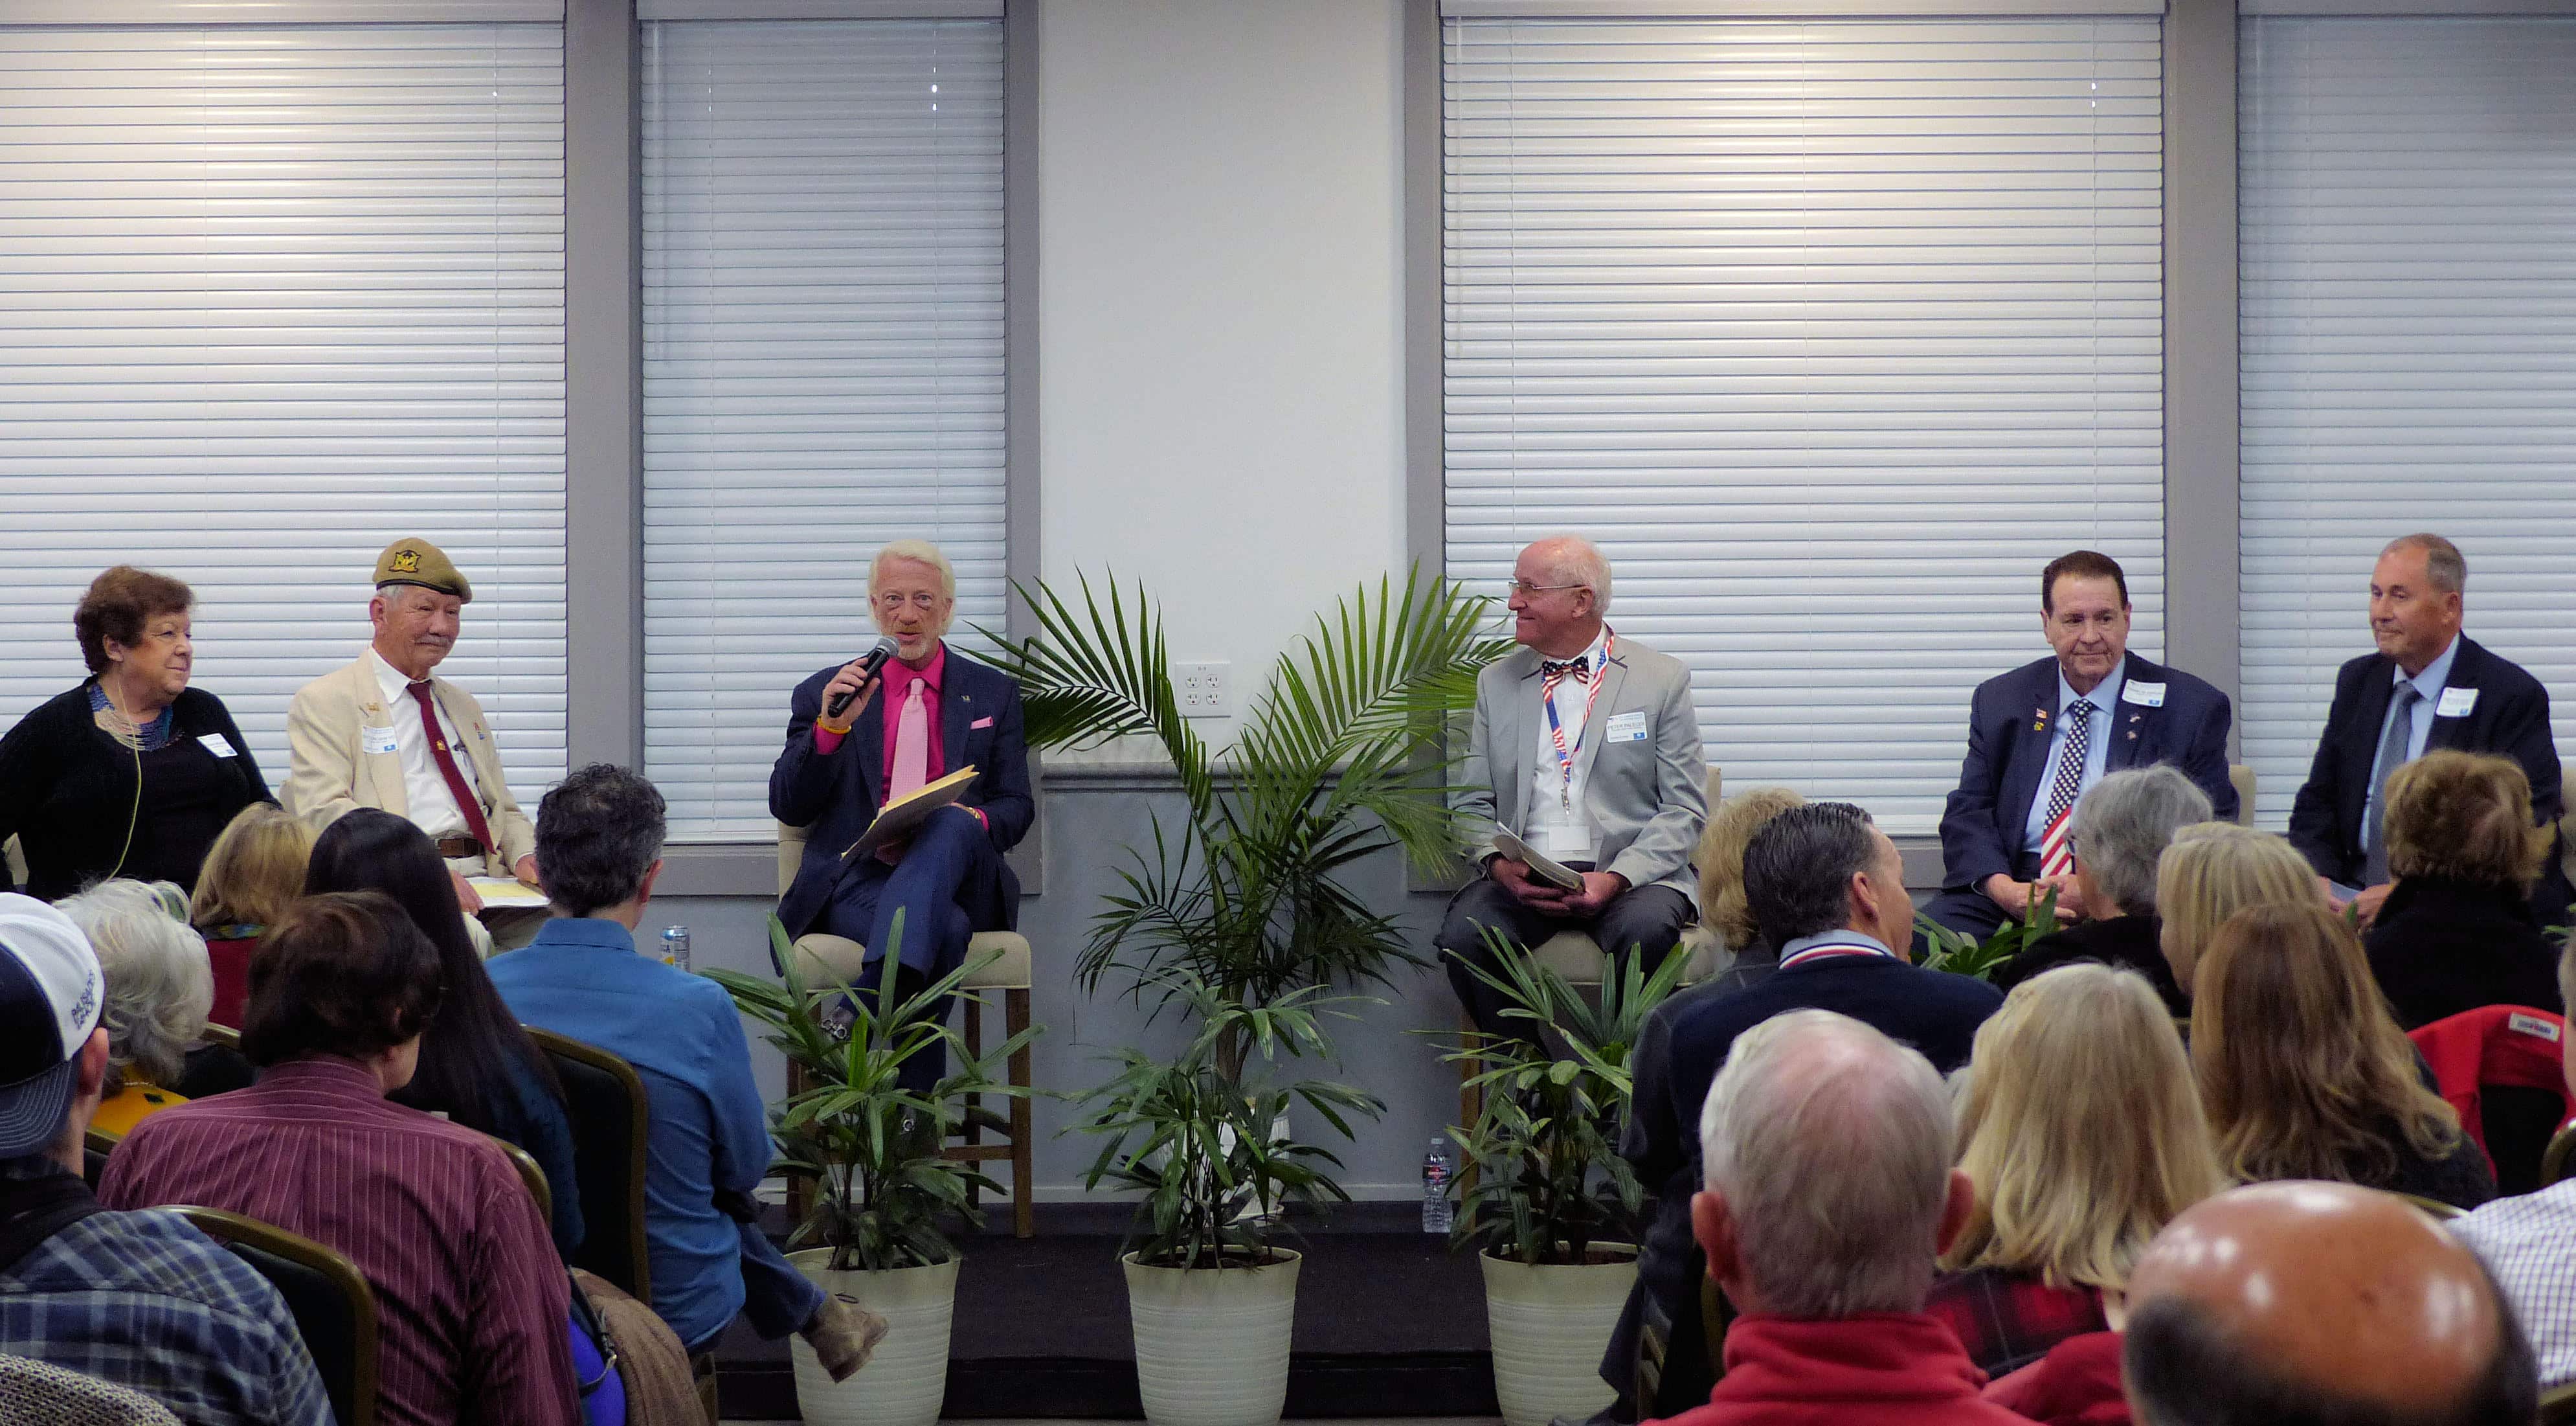 Liberty Forum & Human Events Dissident Panel: A Front Row Seat to History